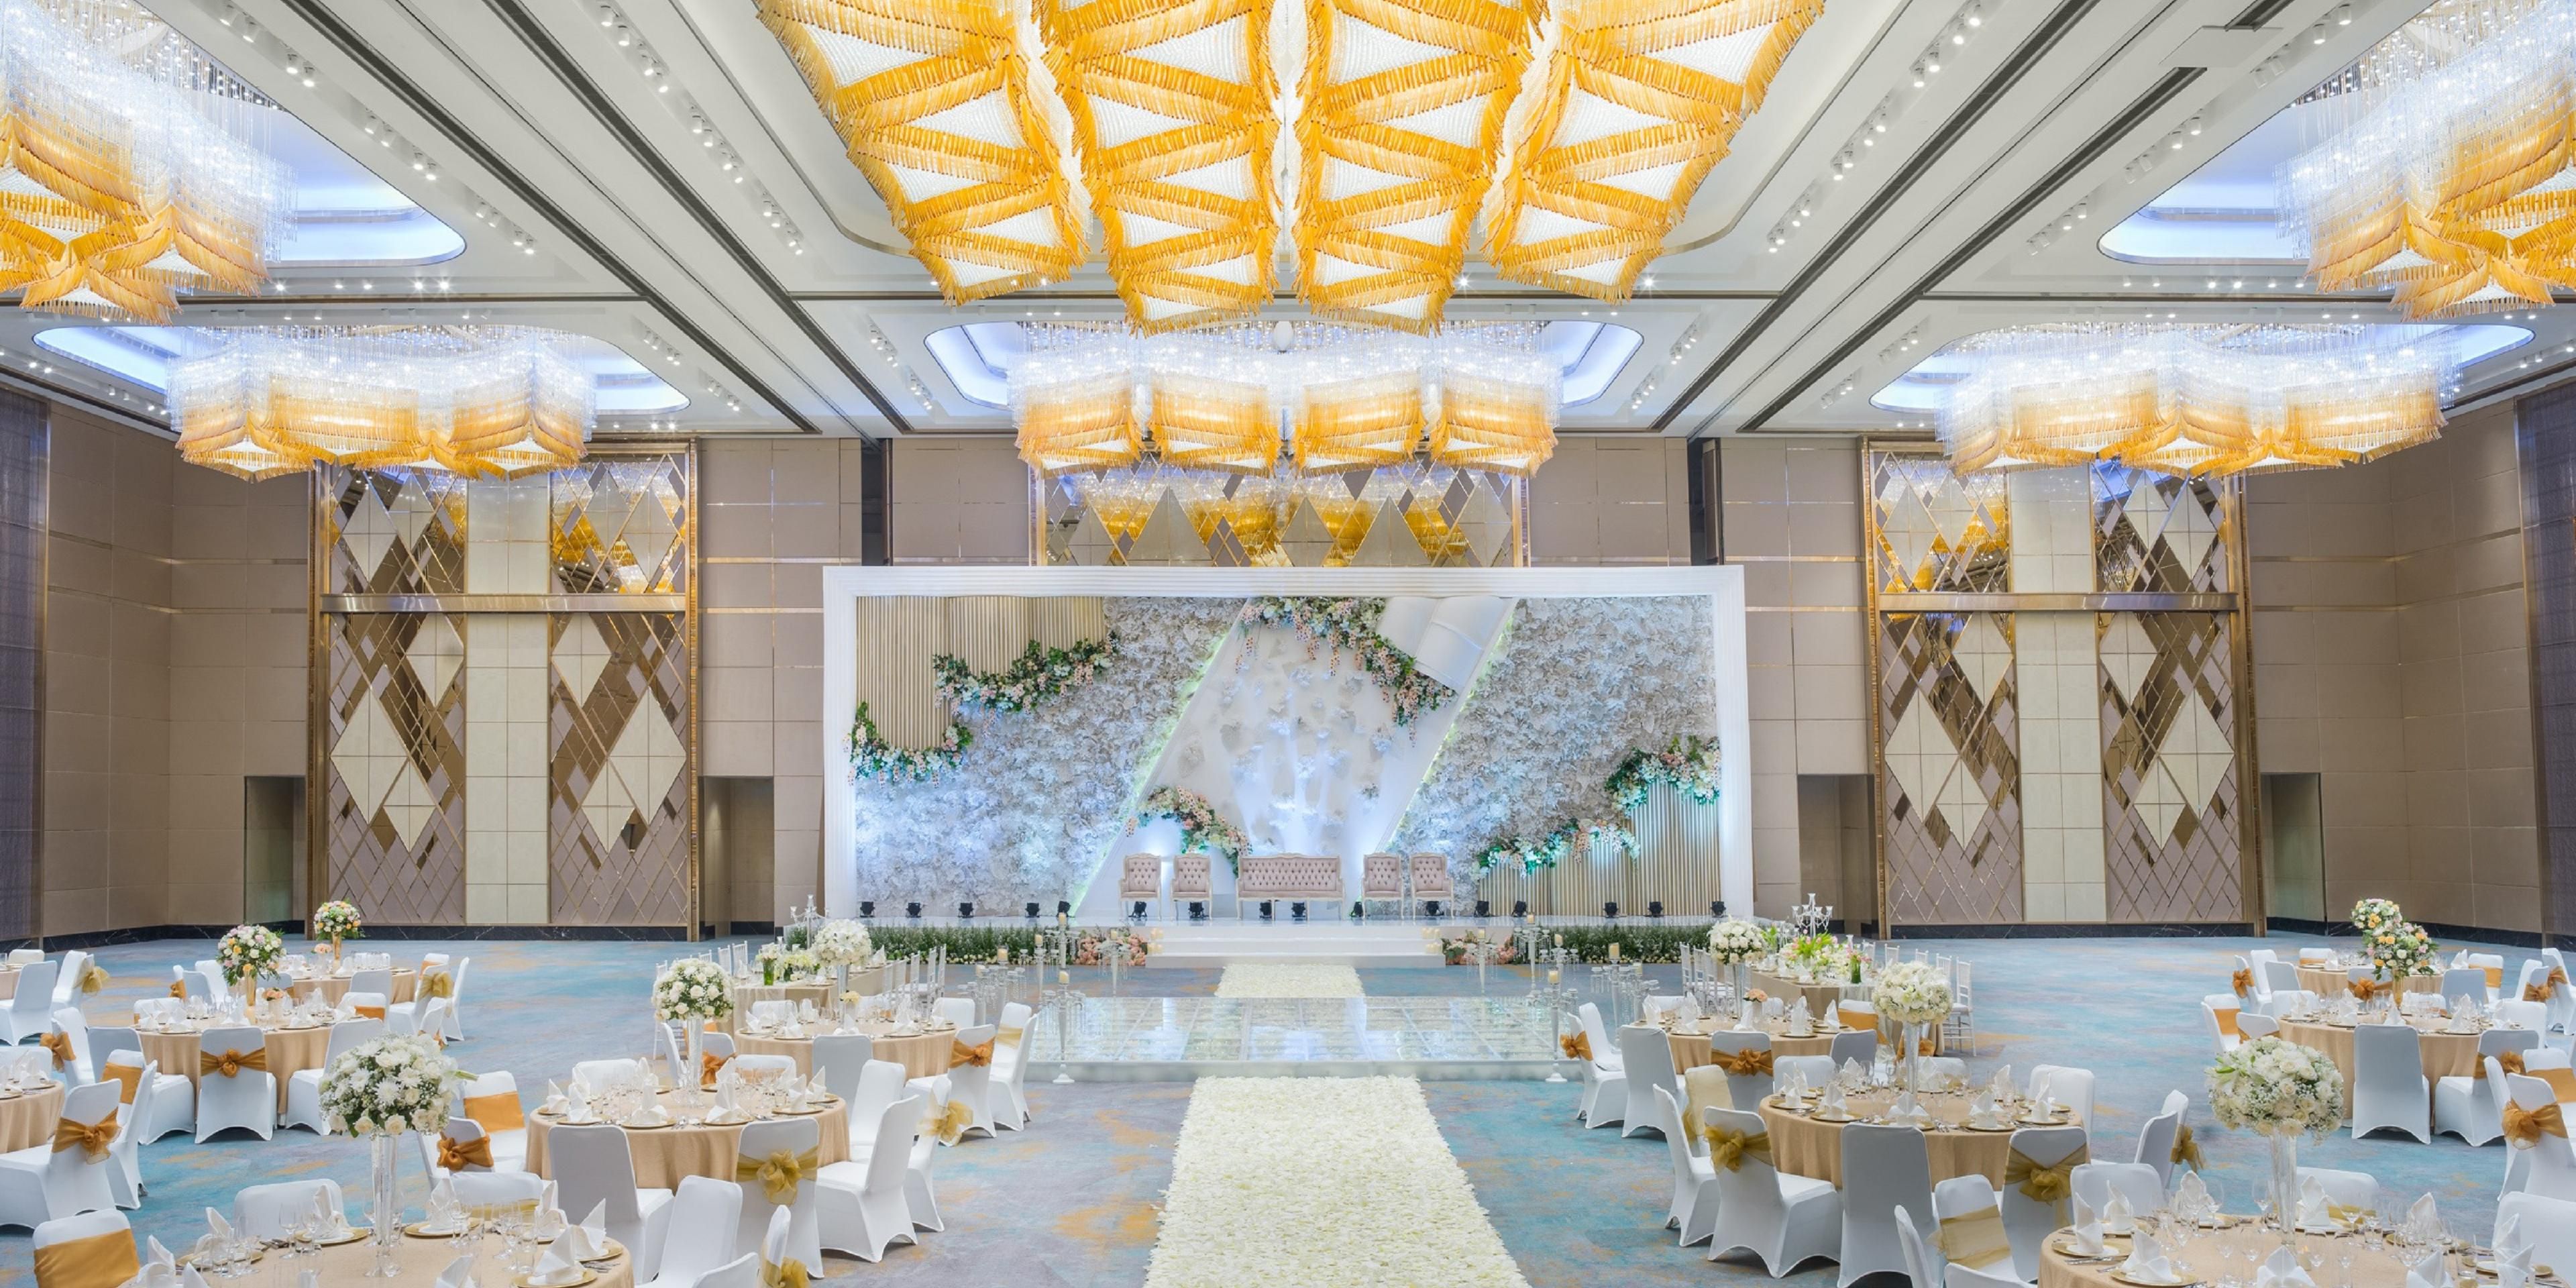 Together forever begins at InterContinental Jakarta Pondok Indah, the premium choice for your Jakarta wedding. Host a spectacular wedding in our Grand Ballroom, or host an intimate wedding at The Terrace. Our Jakarta wedding packages allow you and your guests to enjoy additional luxurious amenities that created by our wedding team